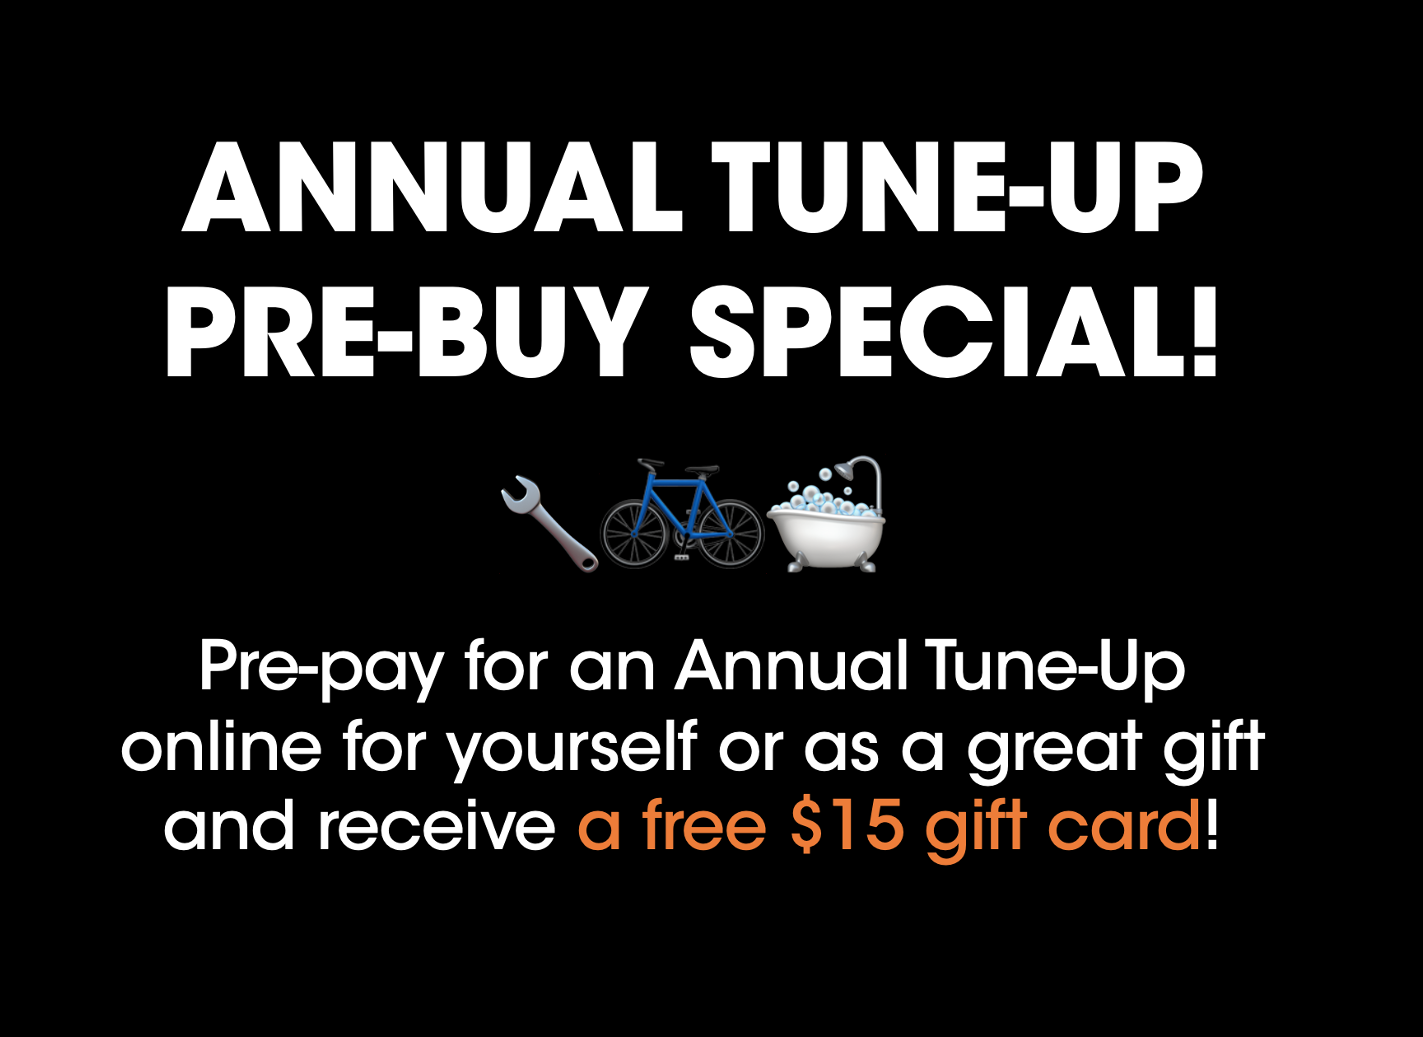 Annual Tune-Up Pre-Buy Special